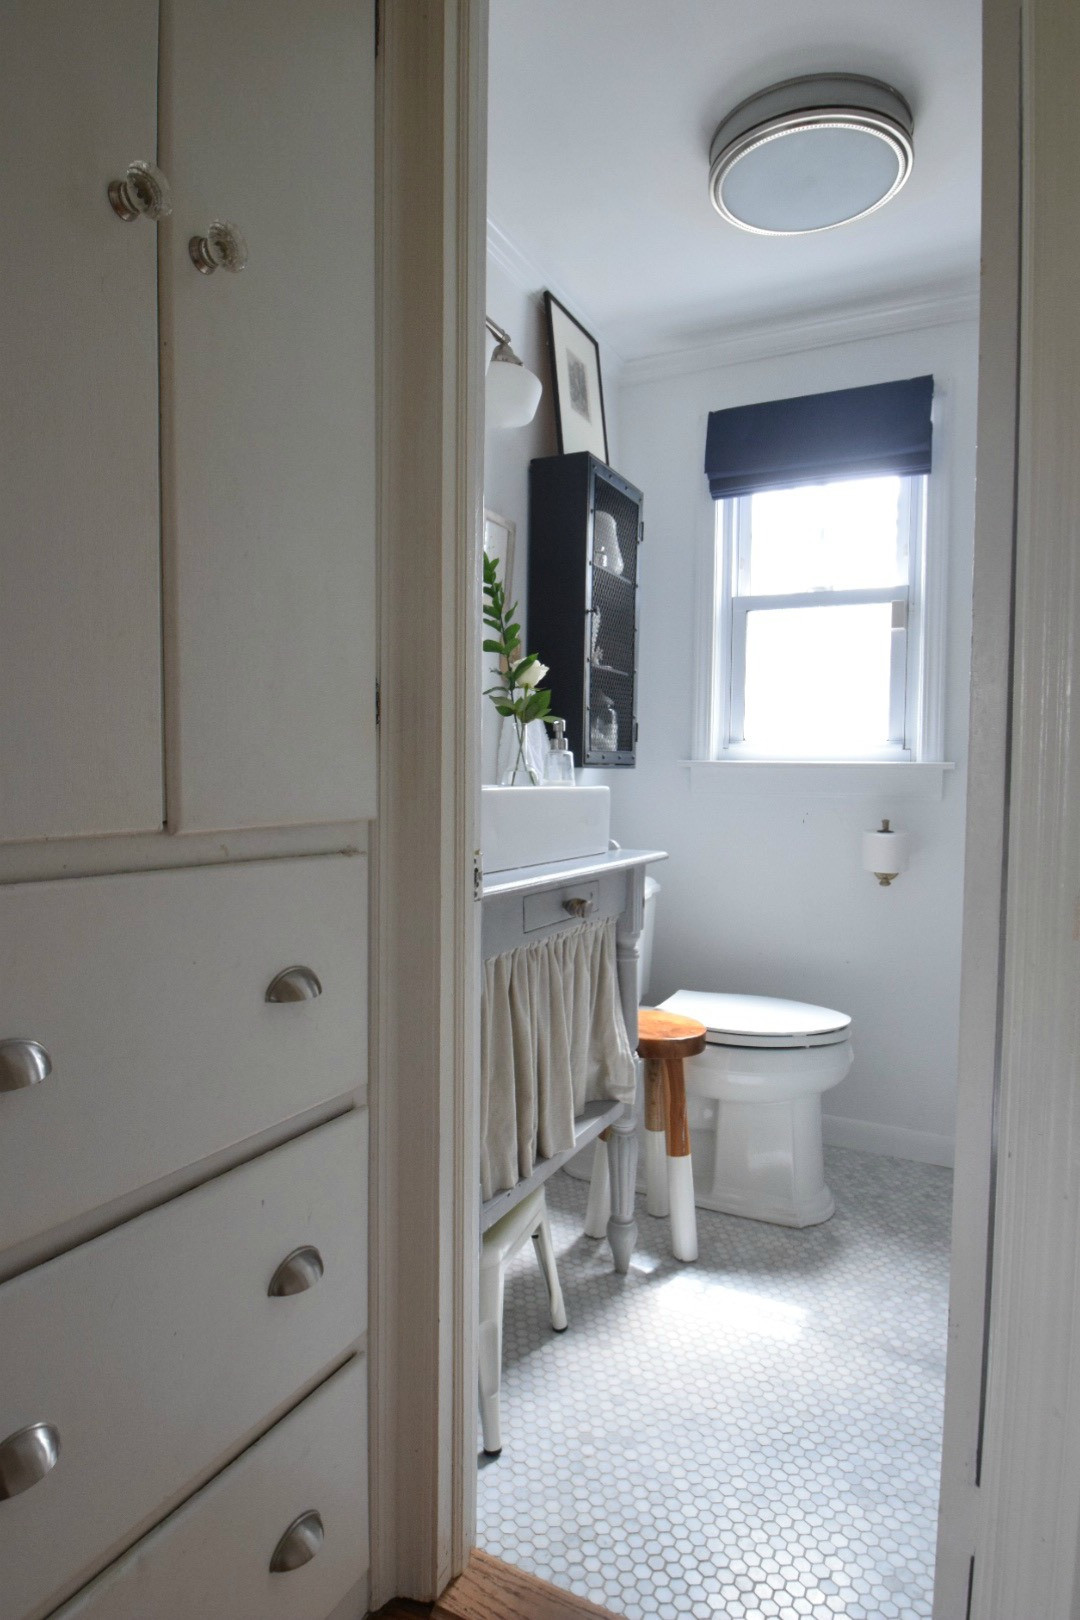 Toilets For Small Bathroom
 Small Bathroom Ideas and Solutions in our Tiny Cape